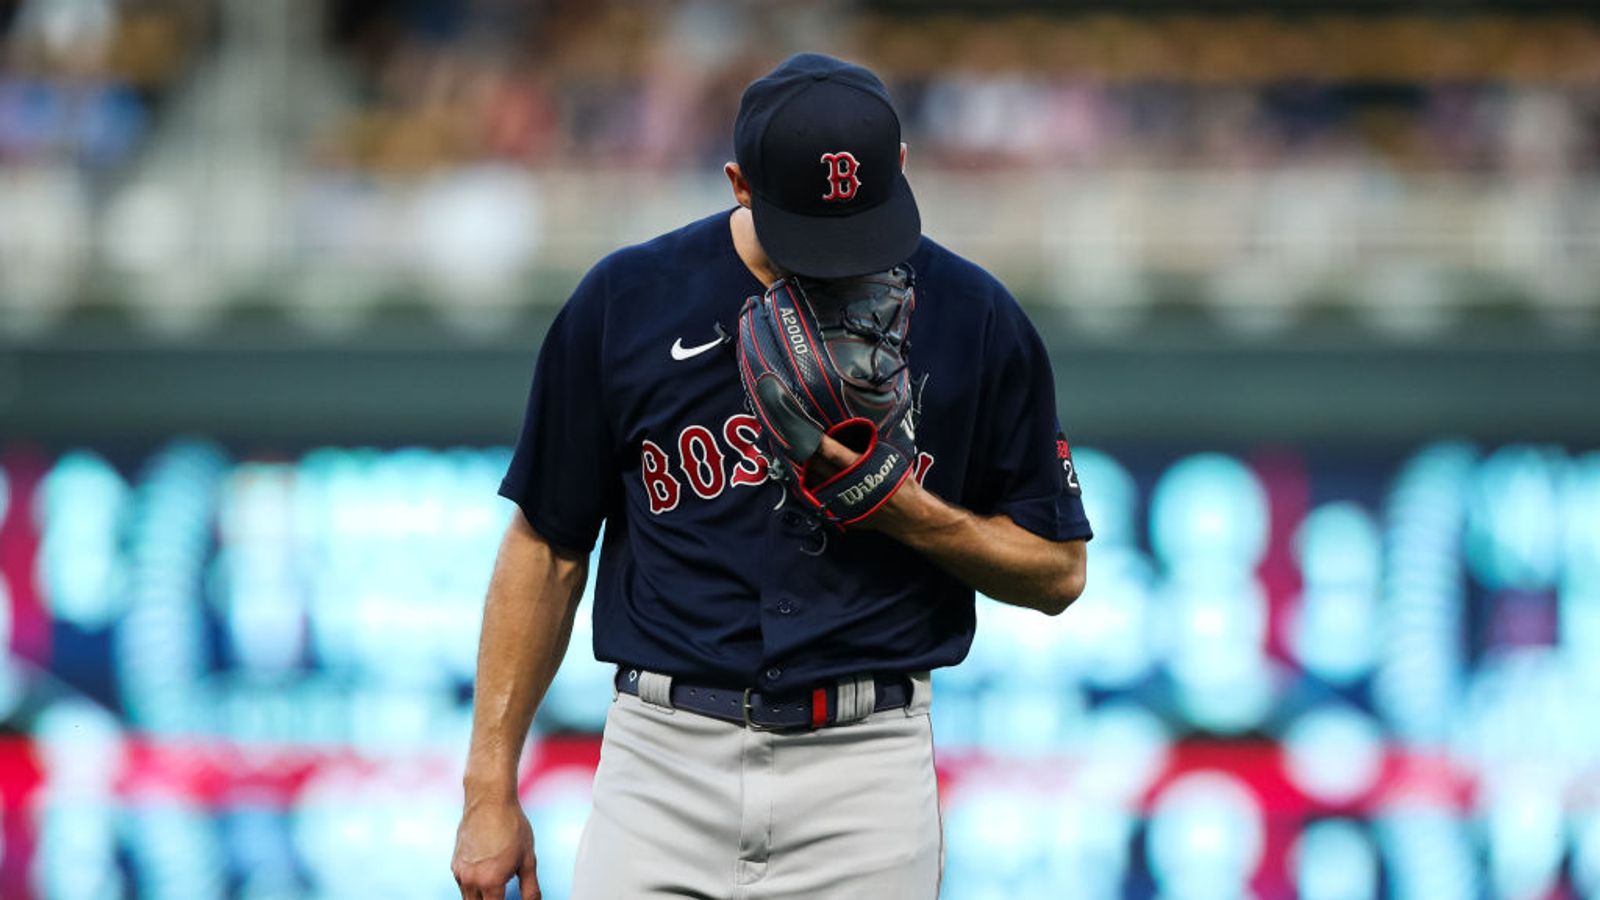 The Red Sox lose to the Seattle Mariners, 8-2, on Saturday at Fenway Park